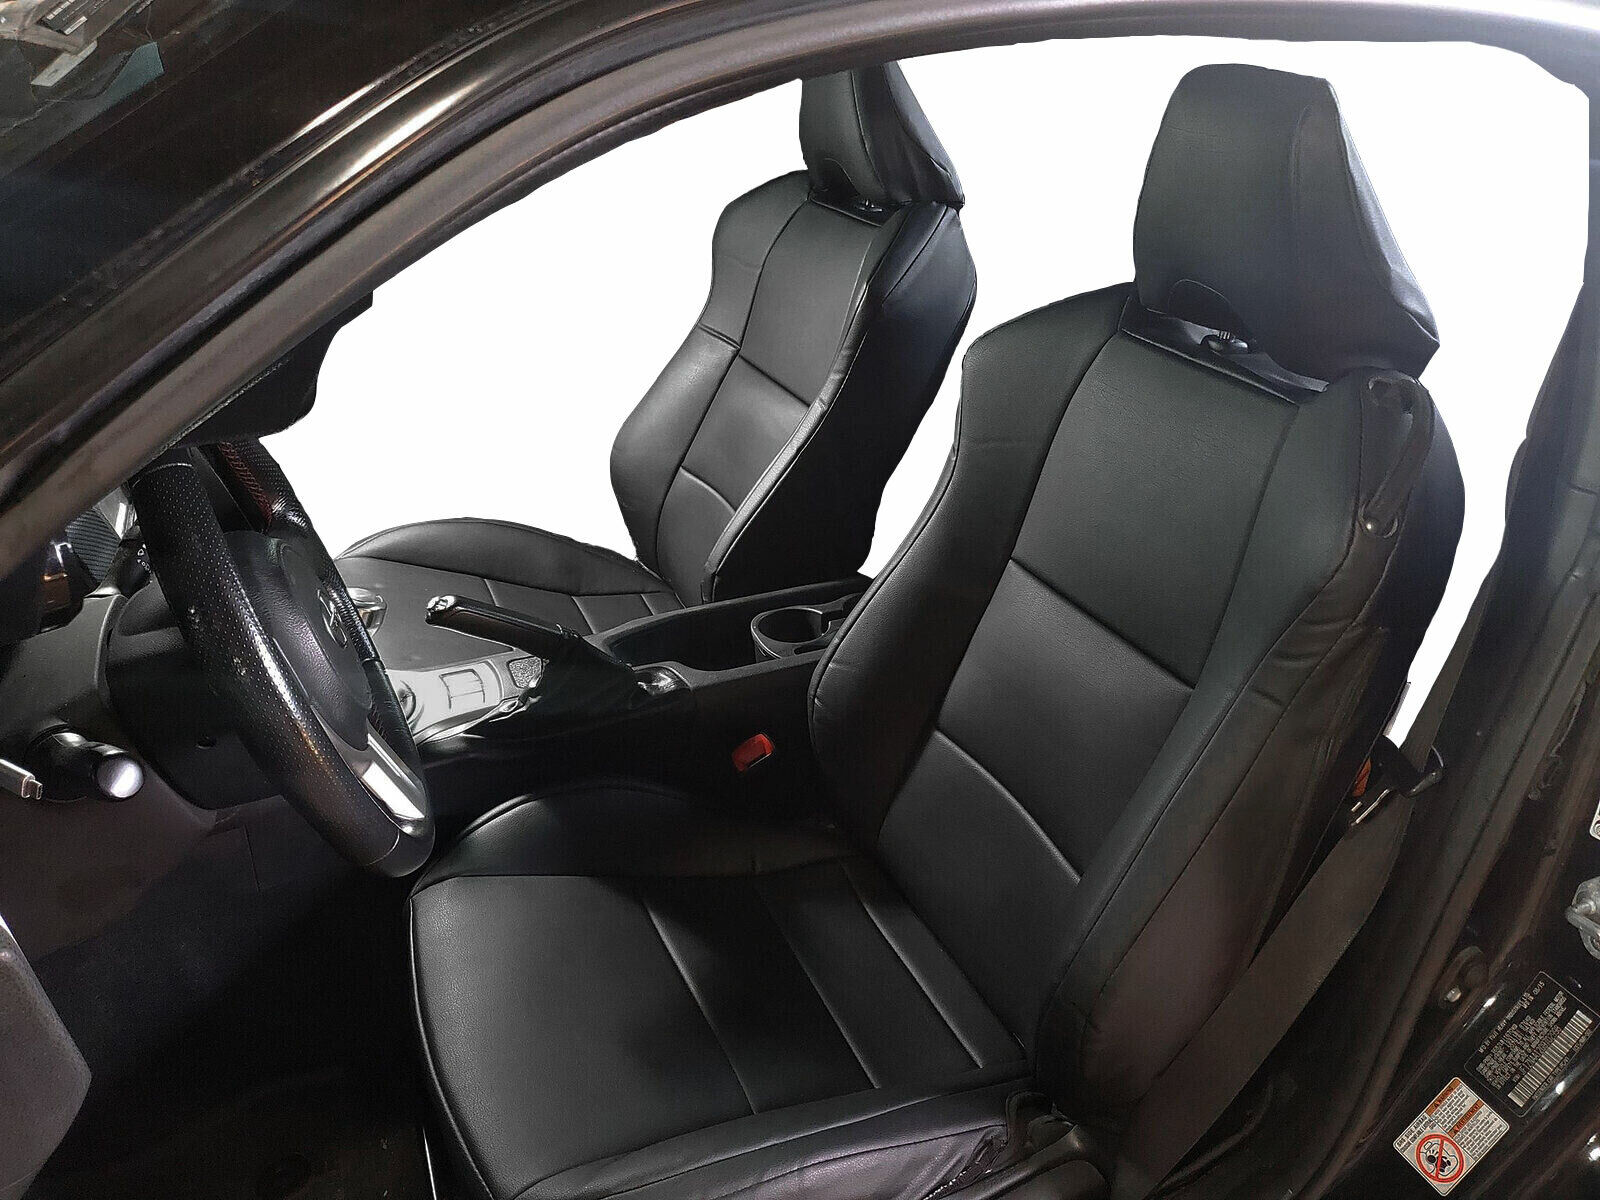 IGGEE S.LEATHER CUSTOM FIT FRONT SEAT COVERS FOR SCION FR-S 2013-2016 BLACK